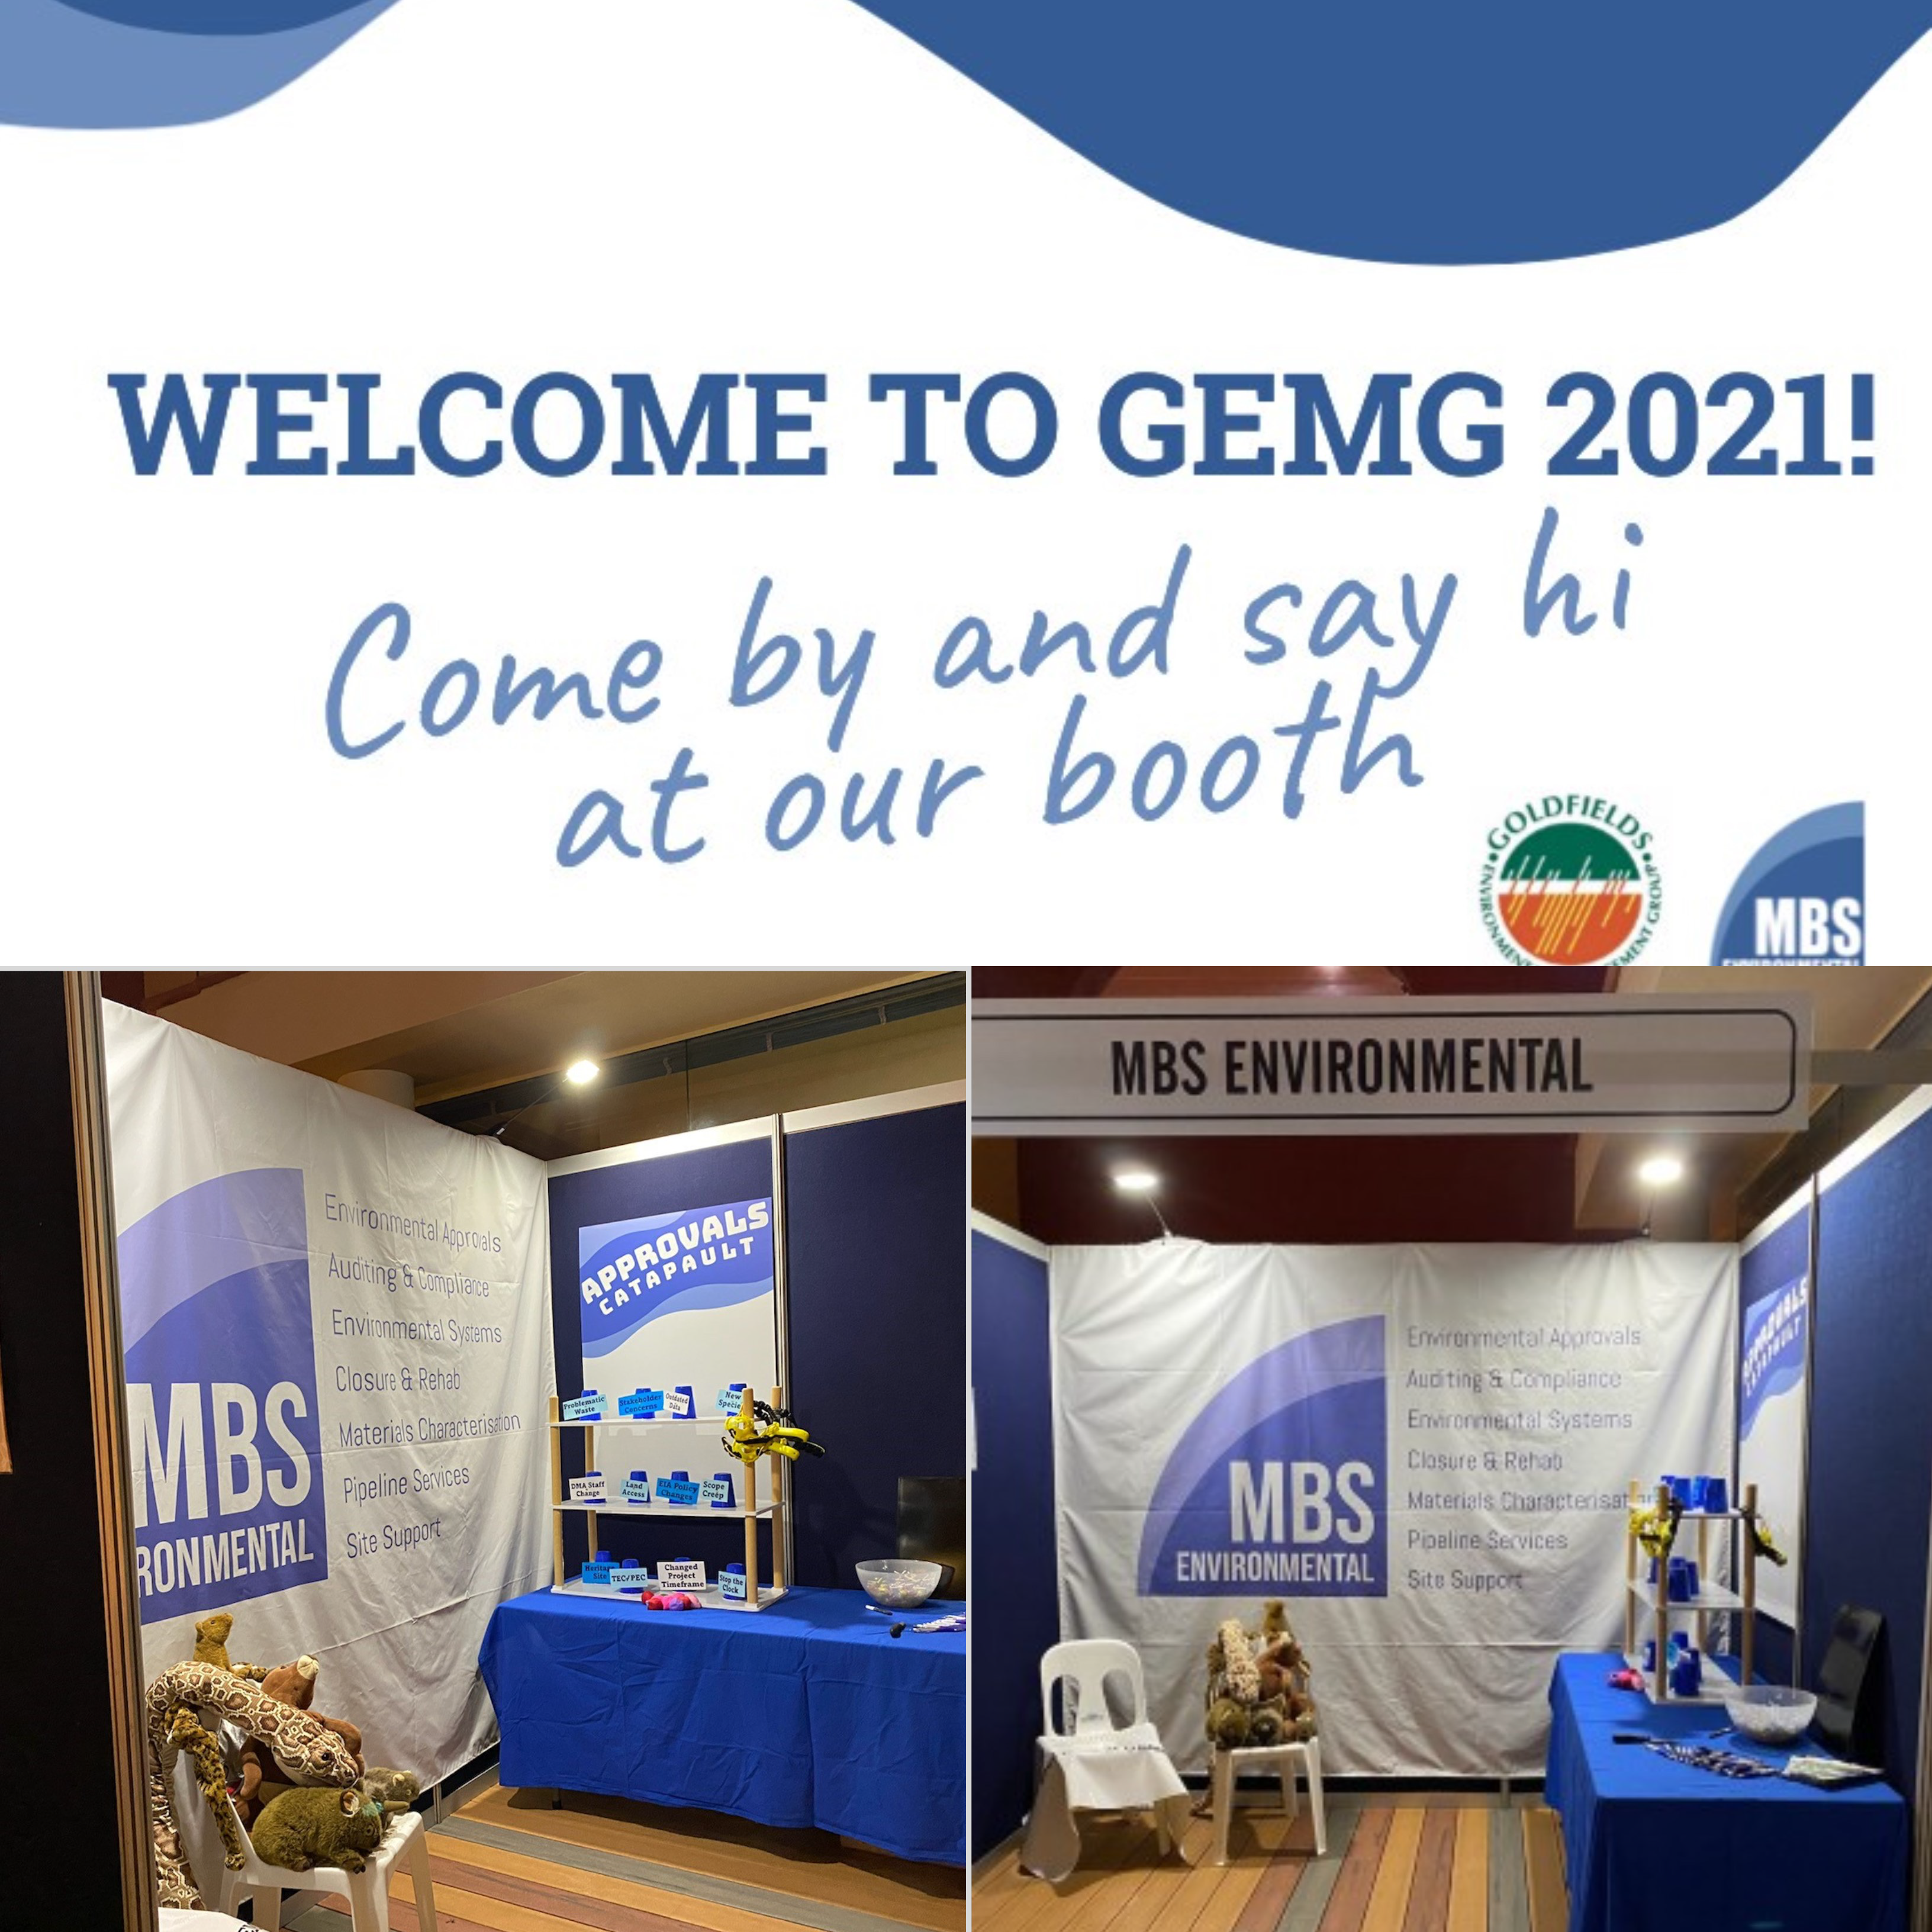 Welcome to GEMG 2021!